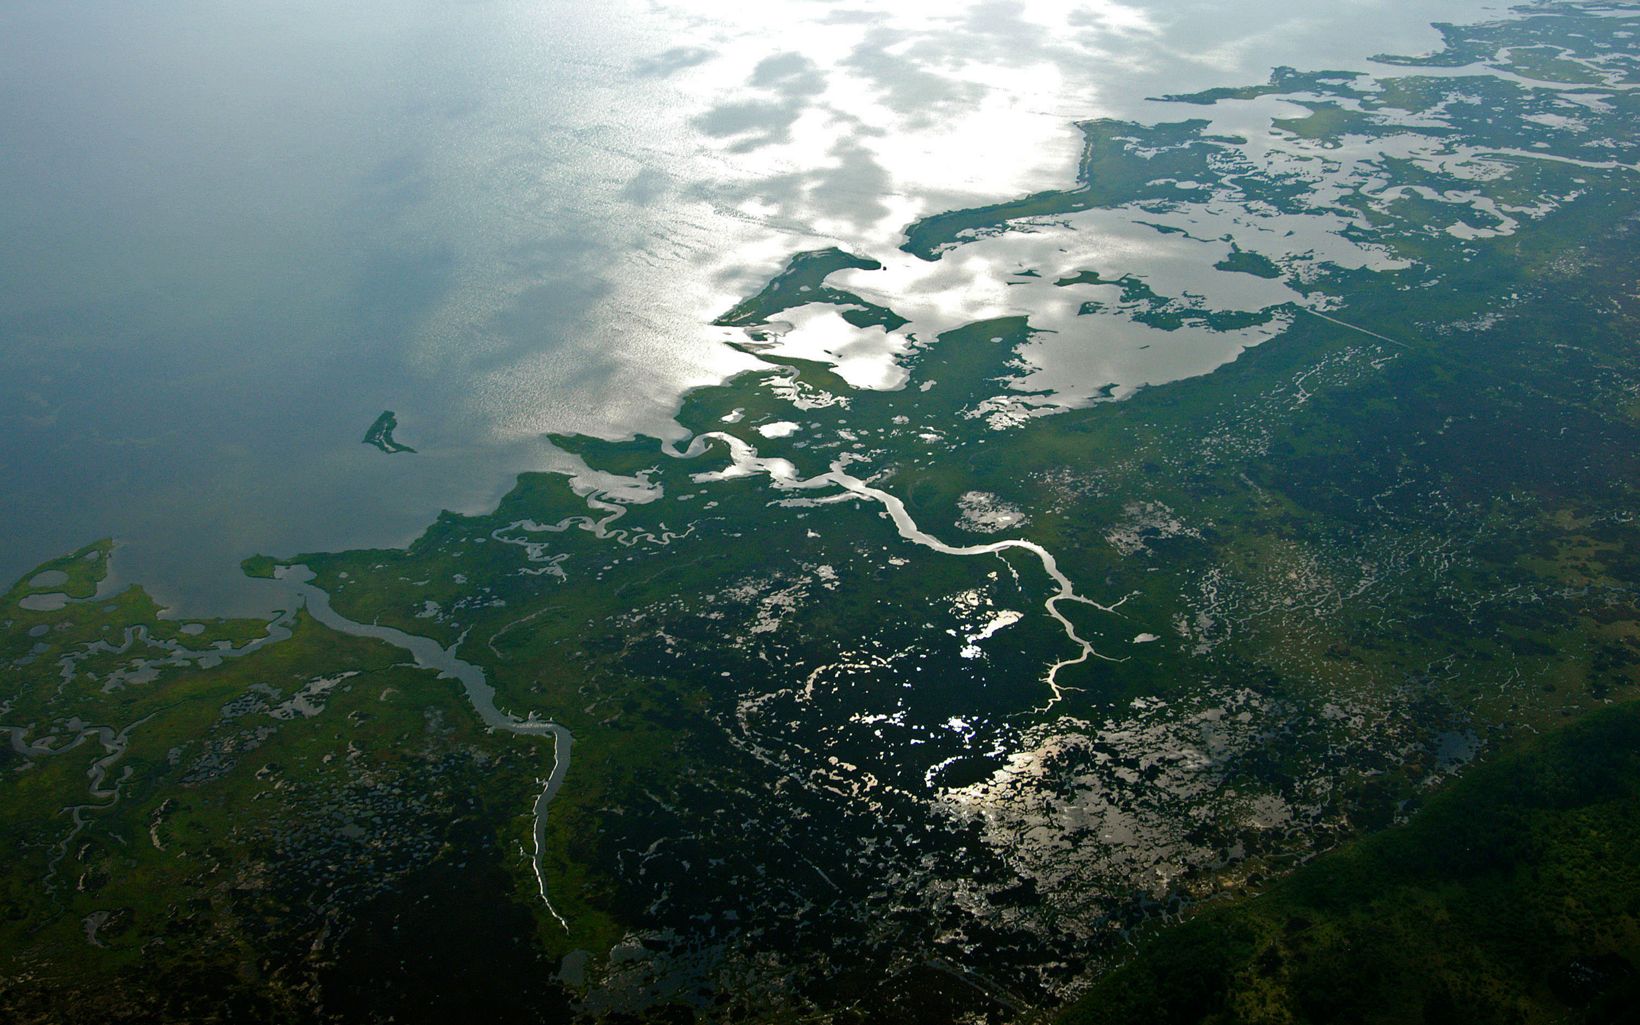 An aerial photo shows intricate pattern of coastal wetlands meeting the open water of the Chesapeake Bay.